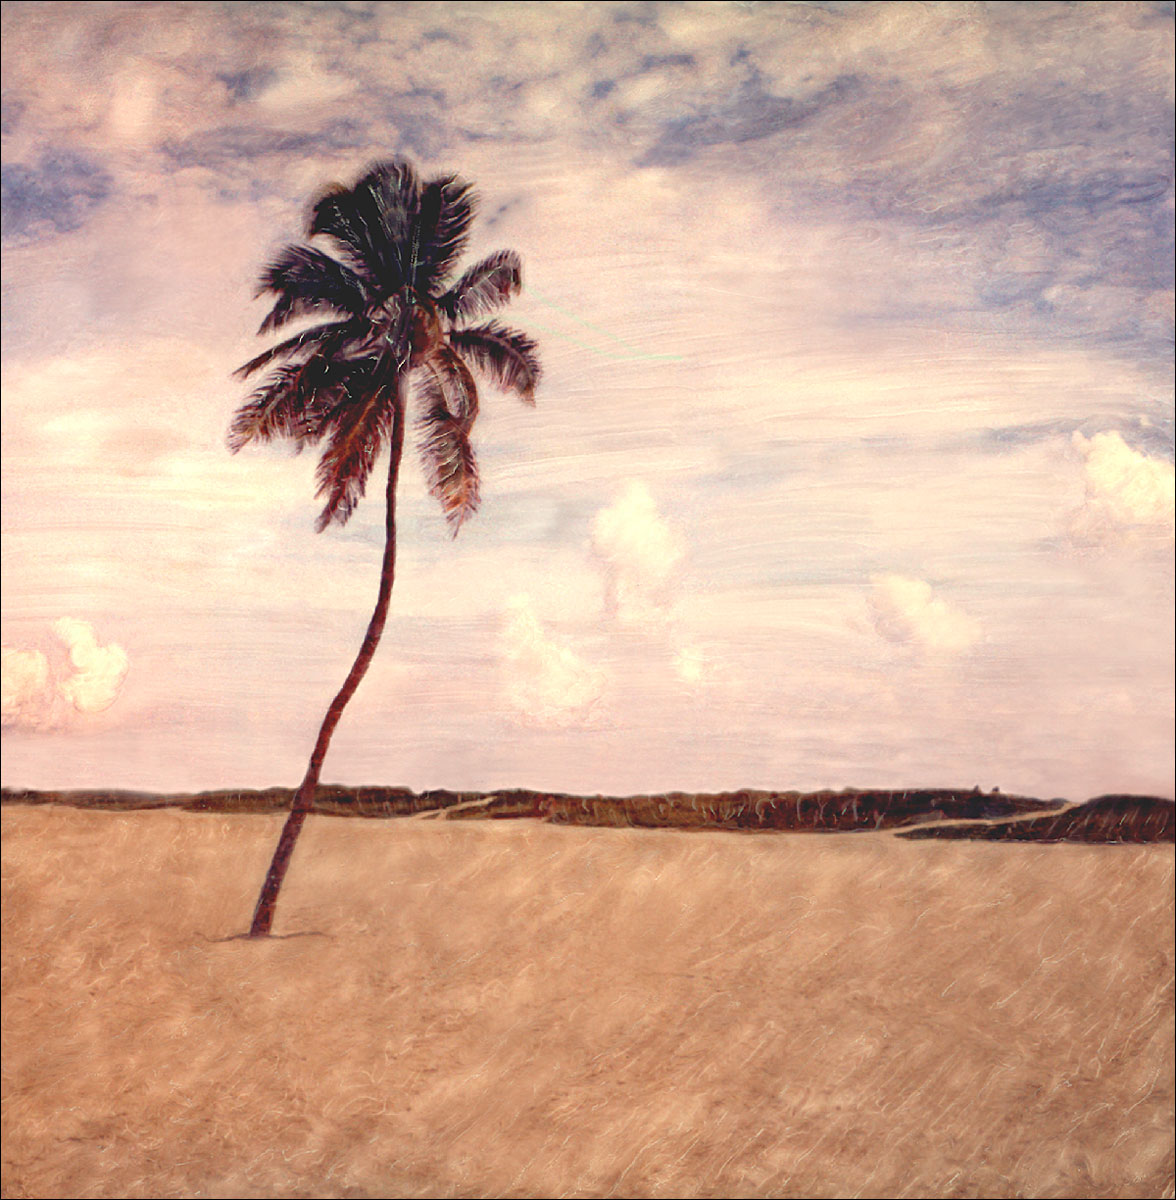 "Lone Palm" <br>Tree on Dunes with Puffy Clouds, Miami Beach, FL